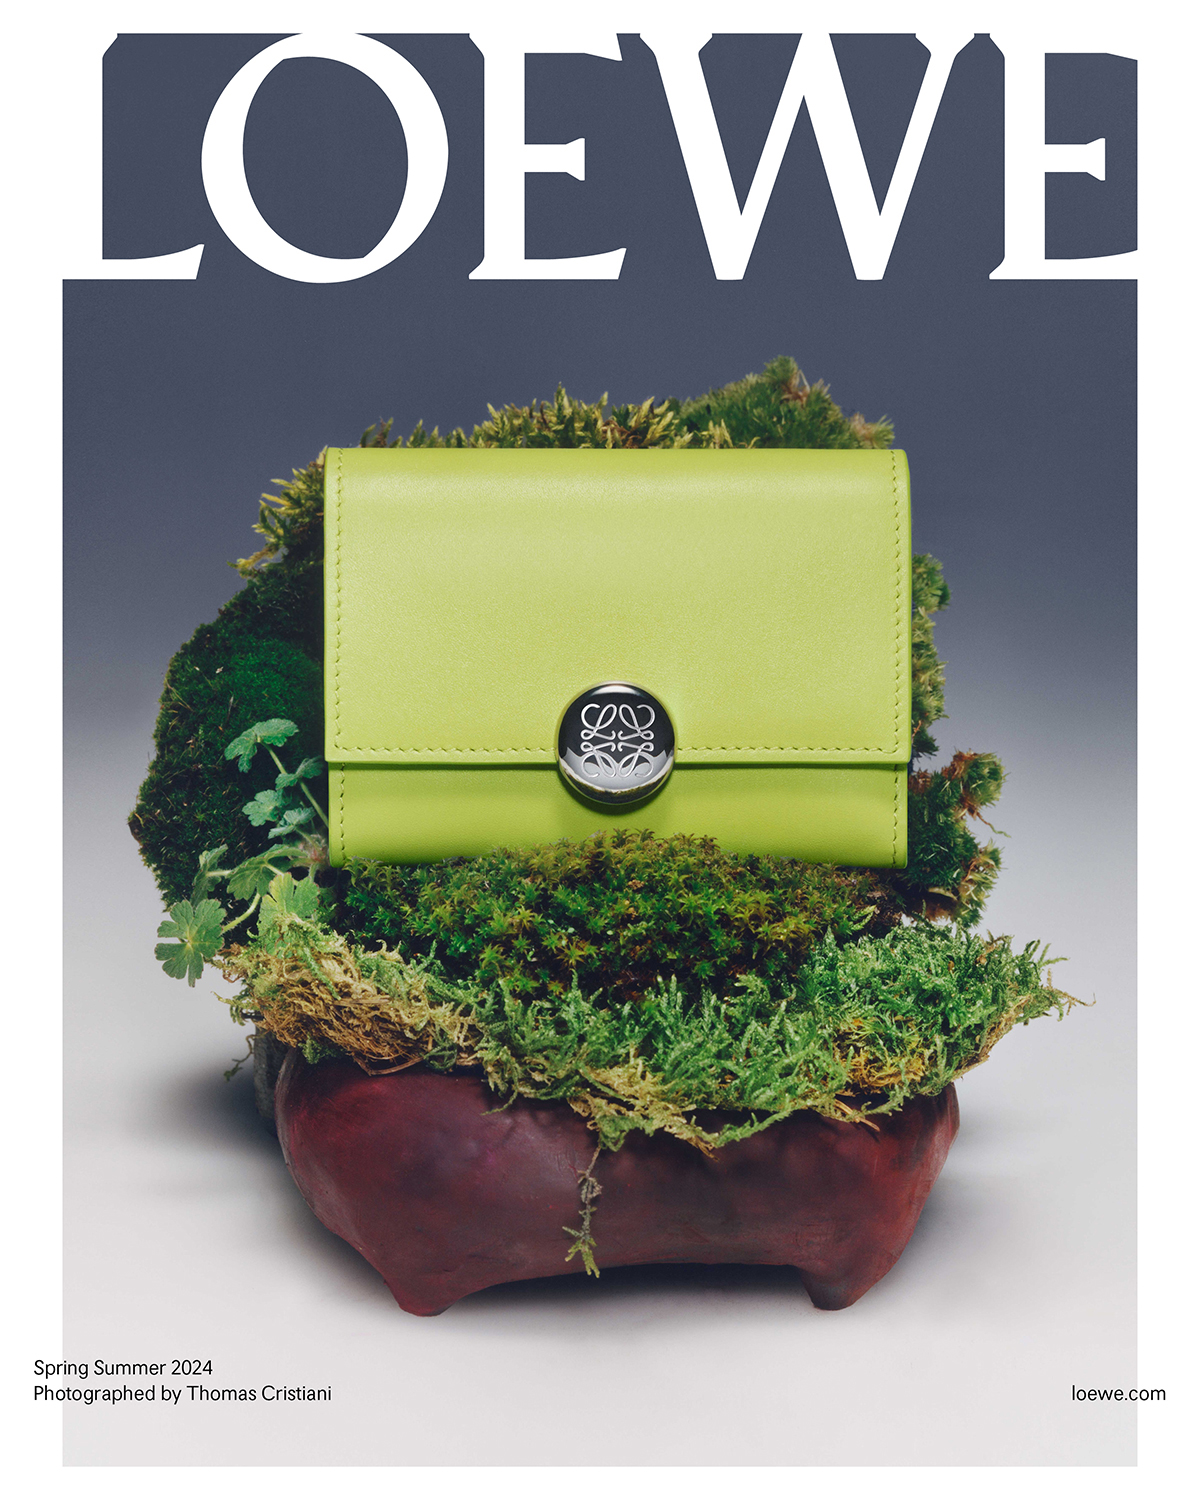 LOEWE 2024 Spring Summer Leather Goods Collection